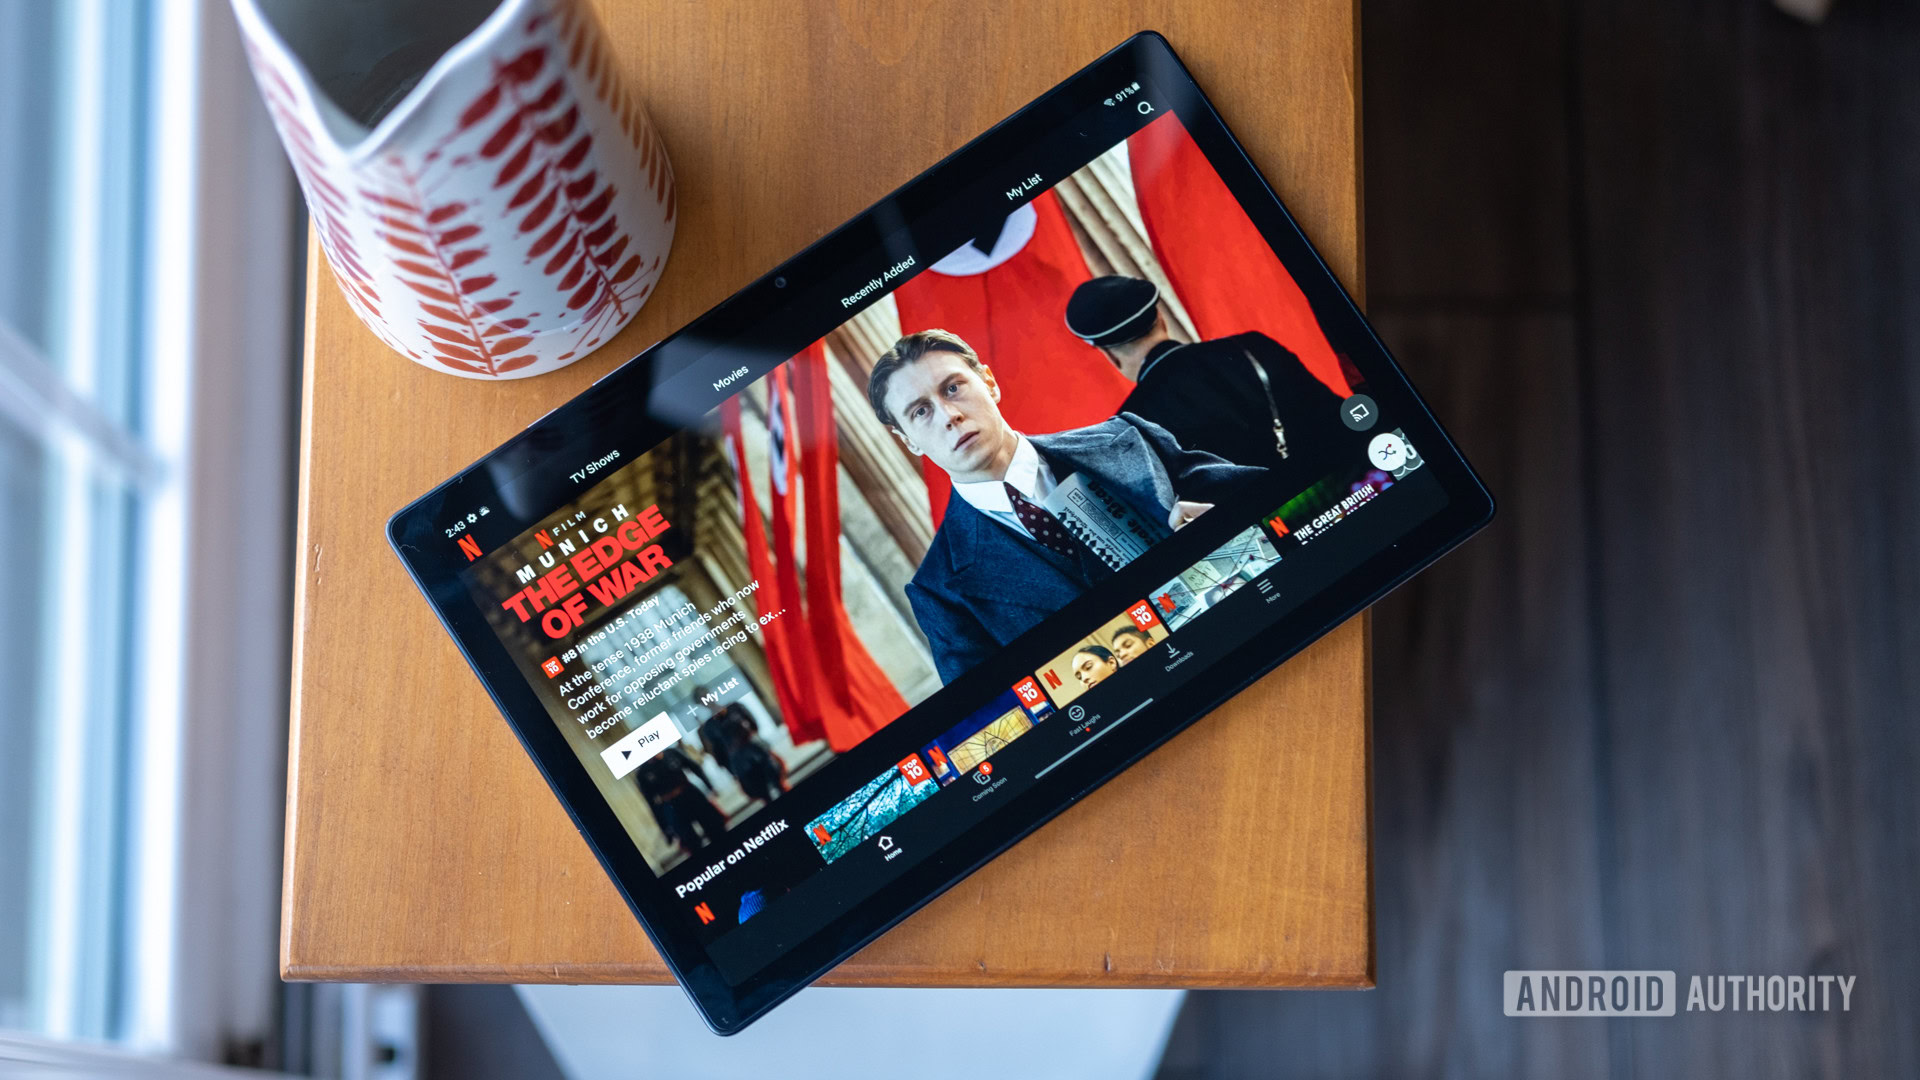 NordVPN works with Netflix on tablets